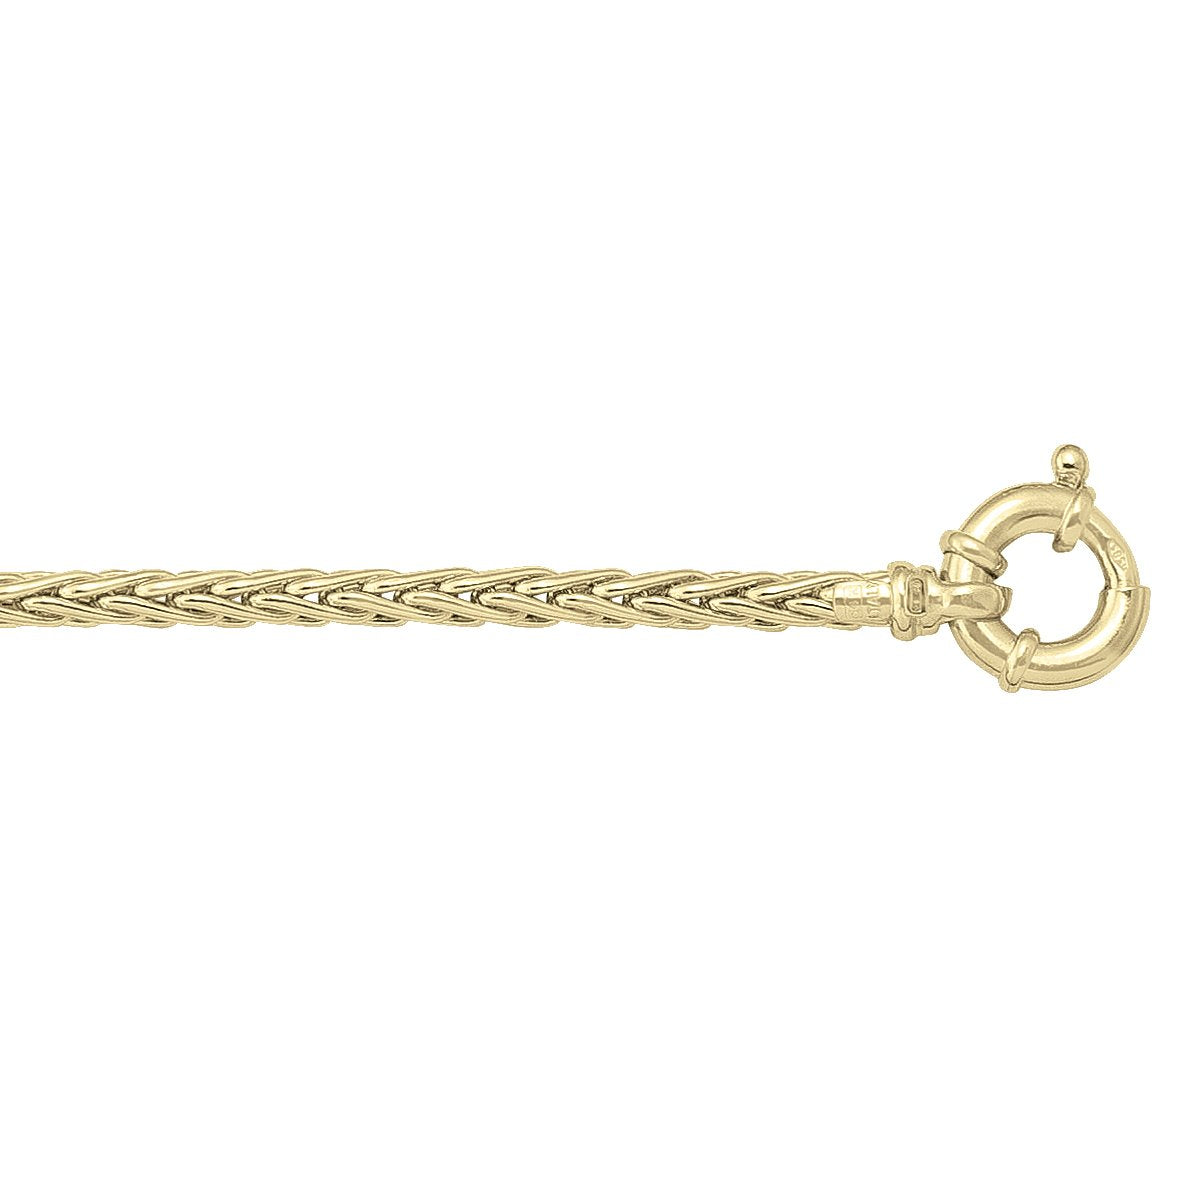 BRACELETS YELLOW GOLD HOLLOW WHEAT LINK CHAIN